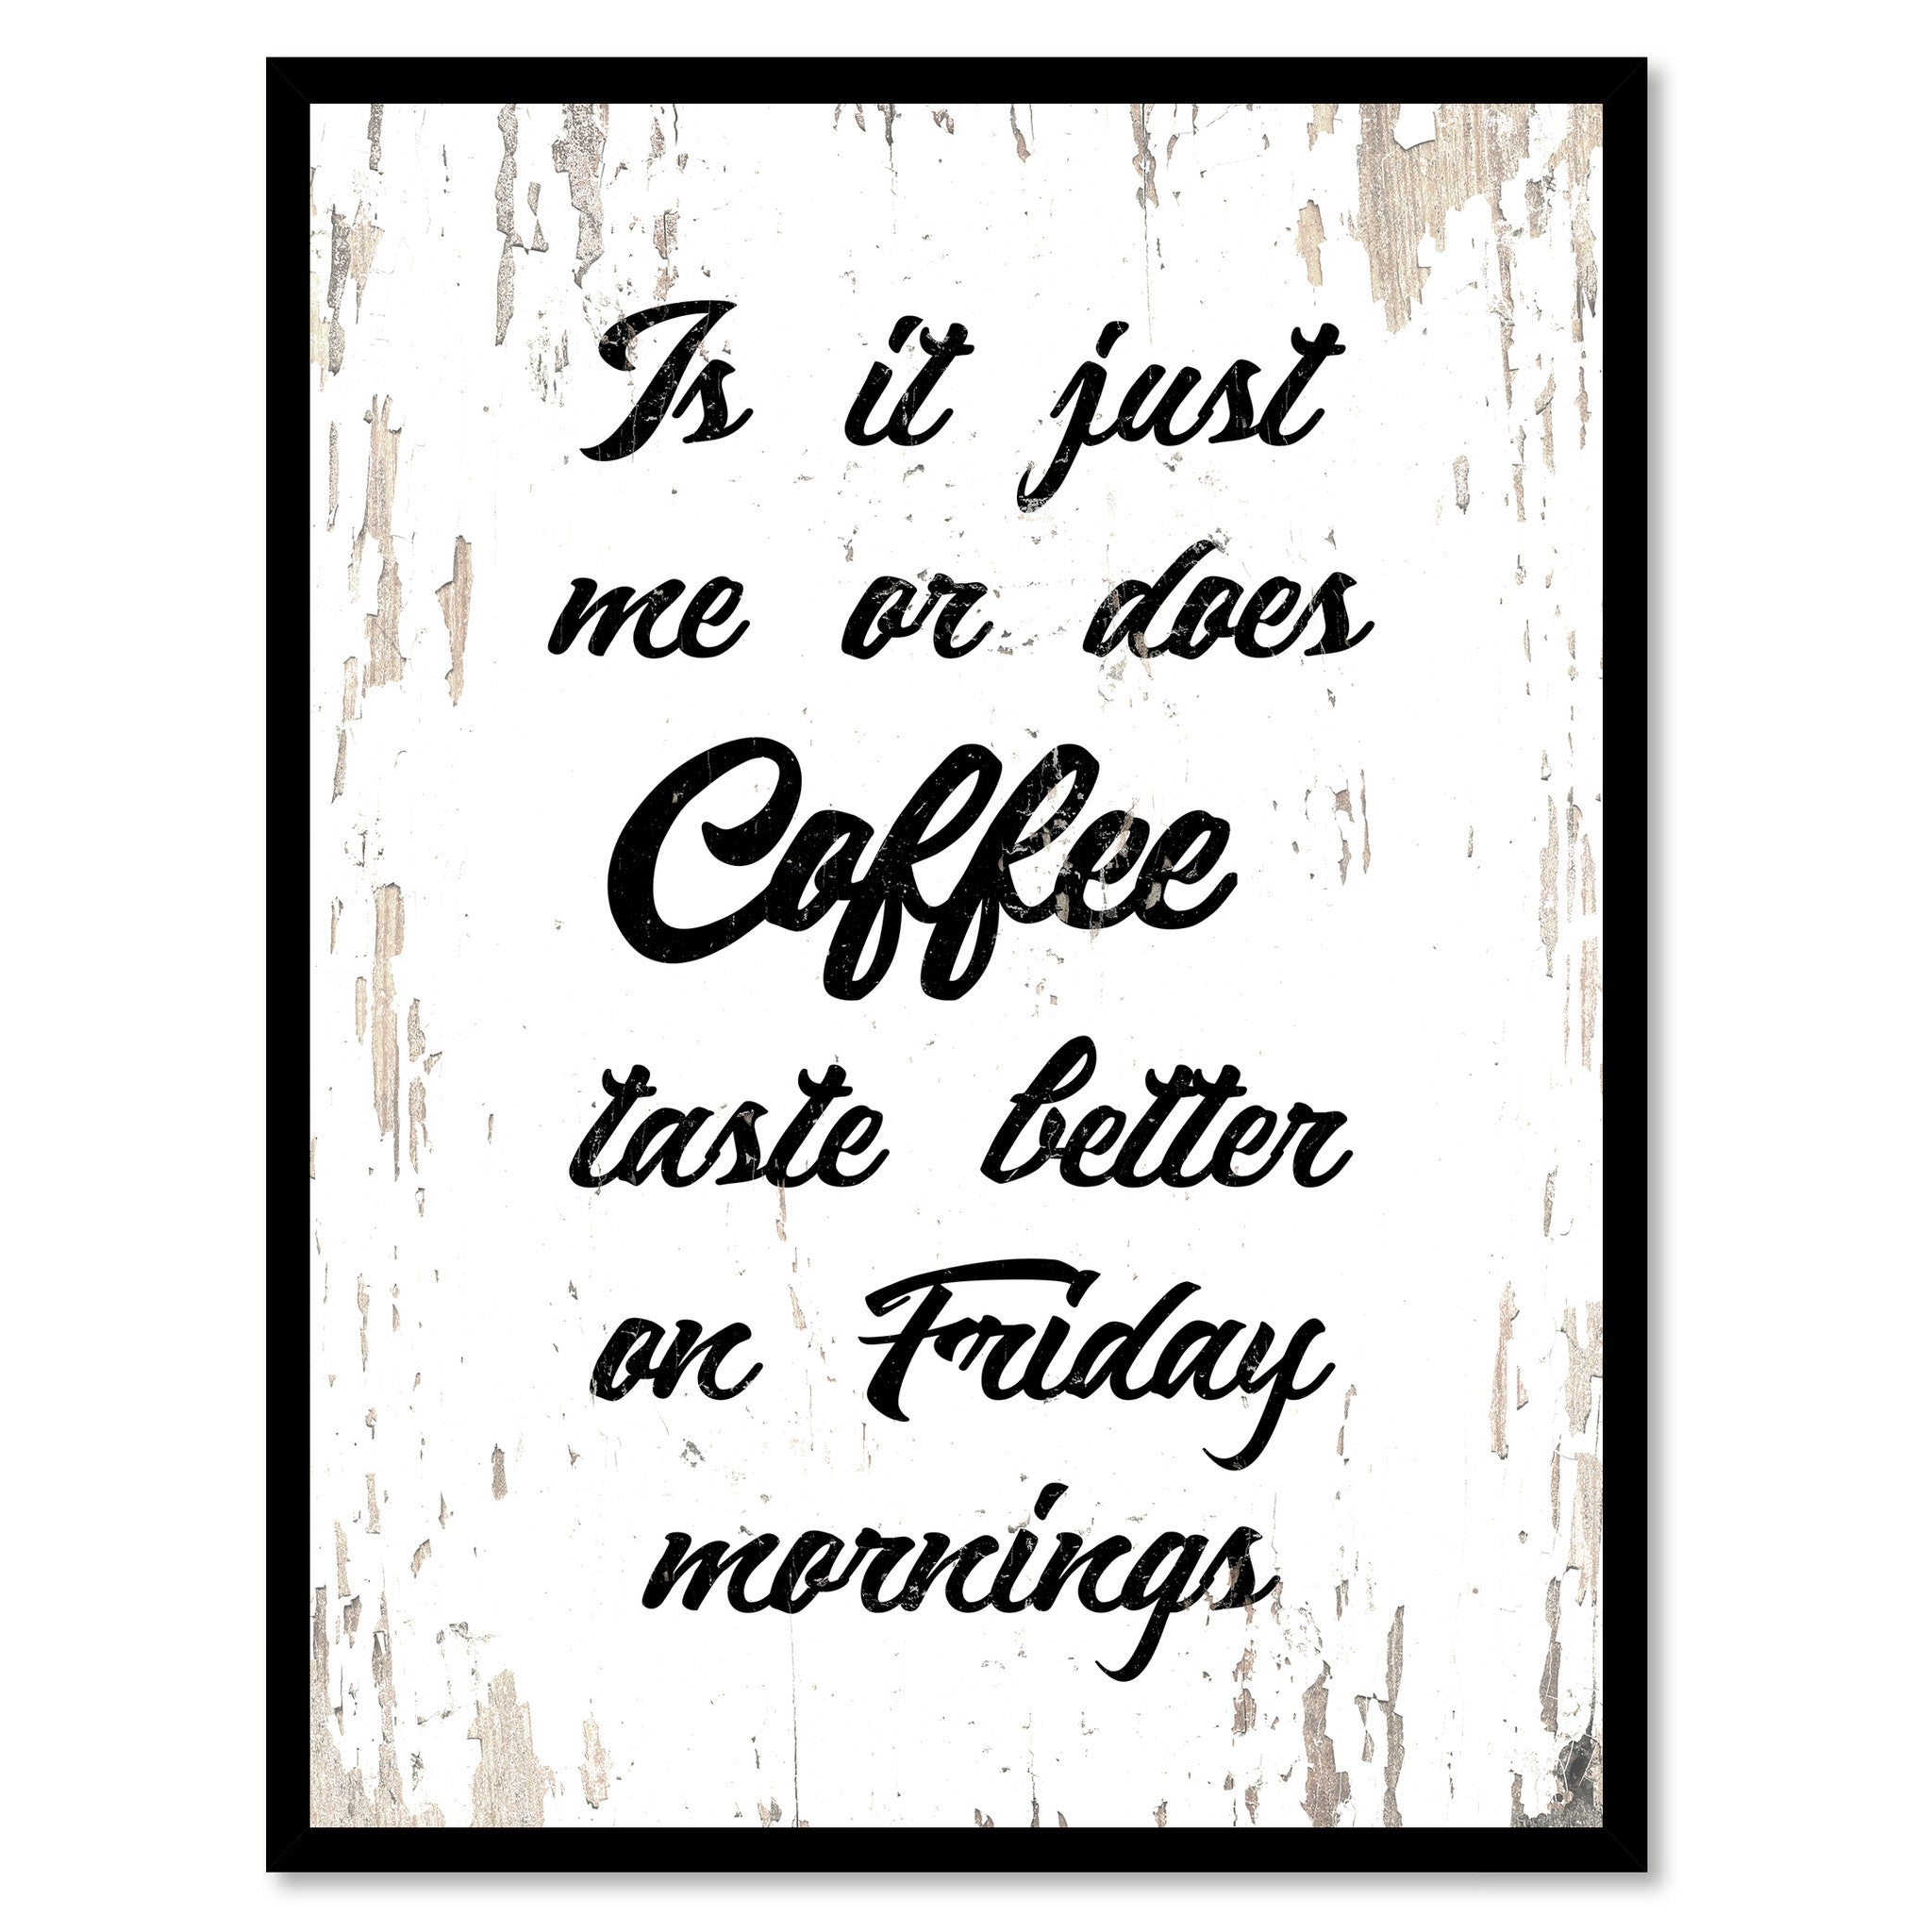 Is It Just Me Or Does Coffee Taste Better On Friday Mornings Quote Saying Canvas Print with Picture Frame